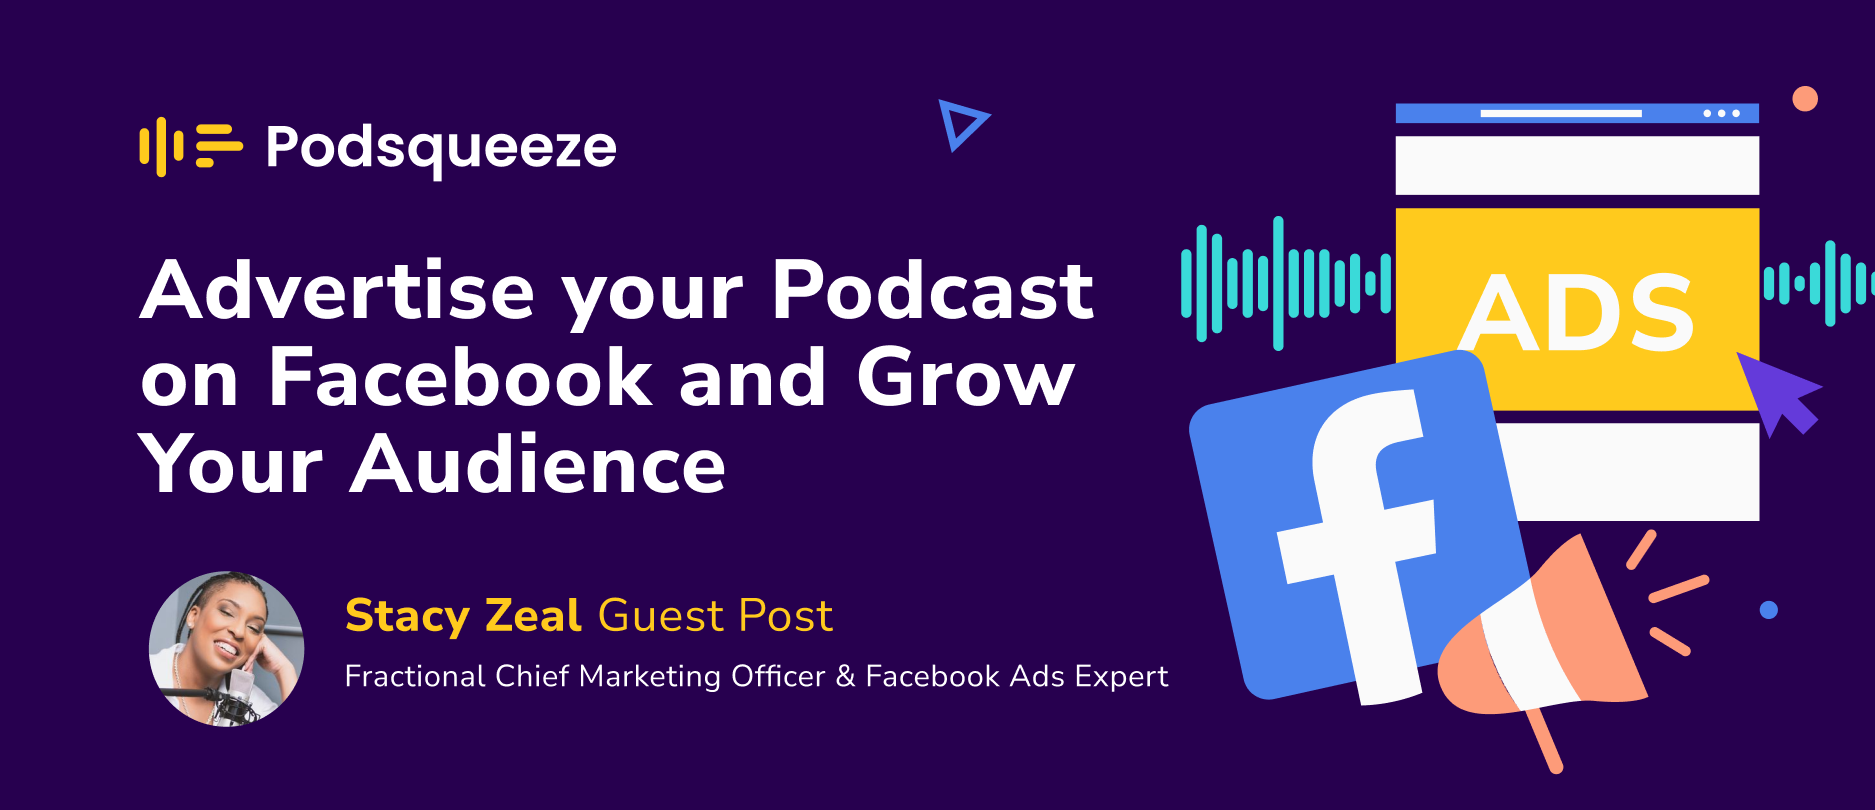 Grow podcast with facebook ads article cover